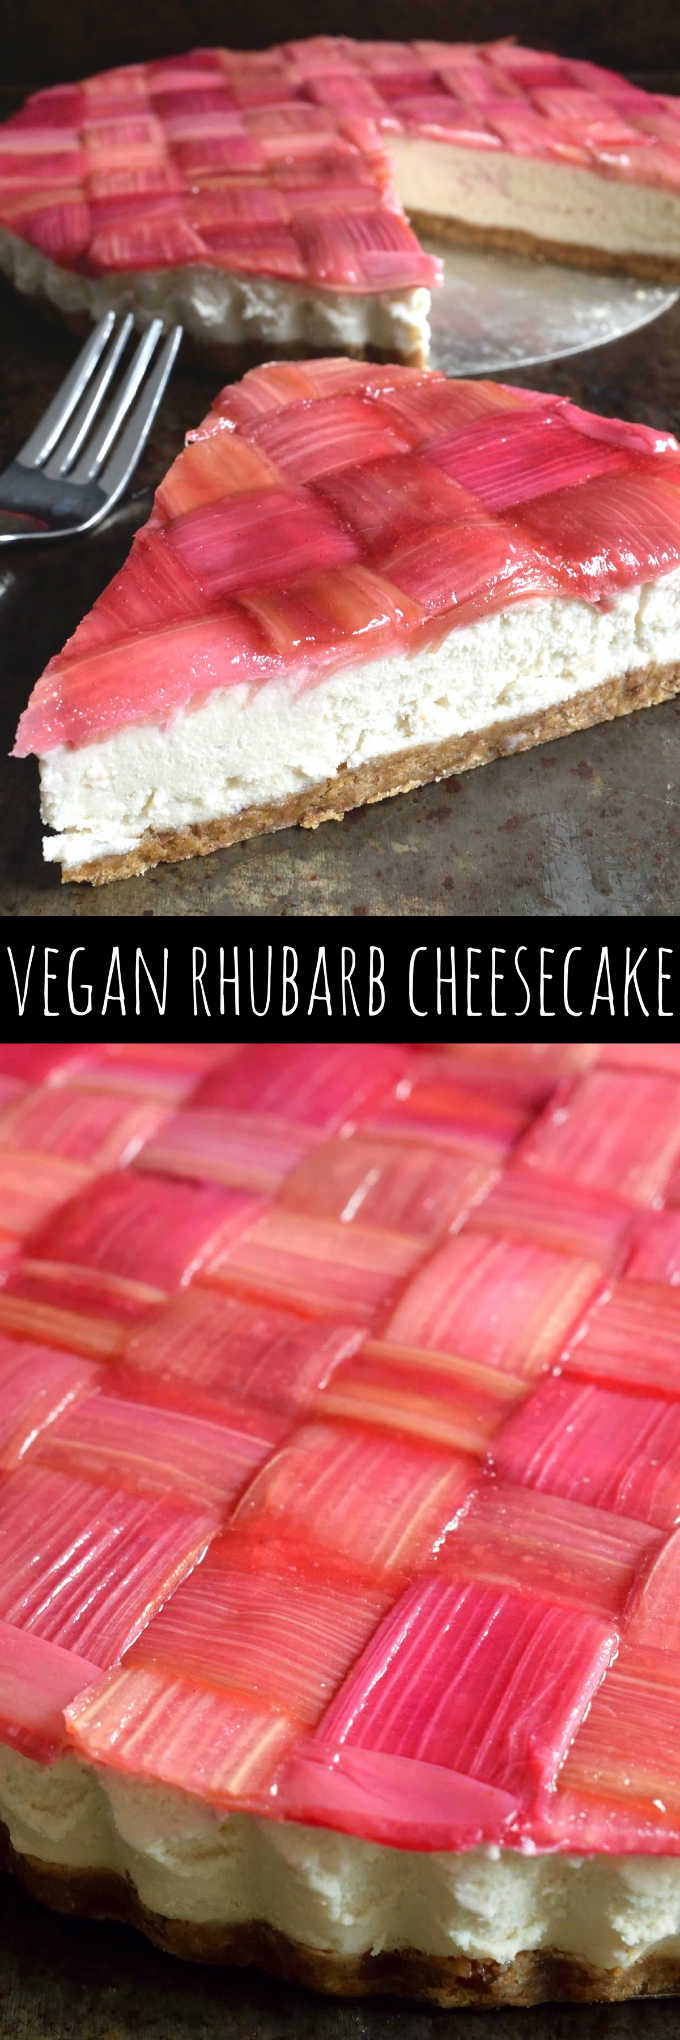 This vegan rhubarb cheesecake looks beautiful, tastes delicious and is surprisingly simple to make with just a few ingredients.